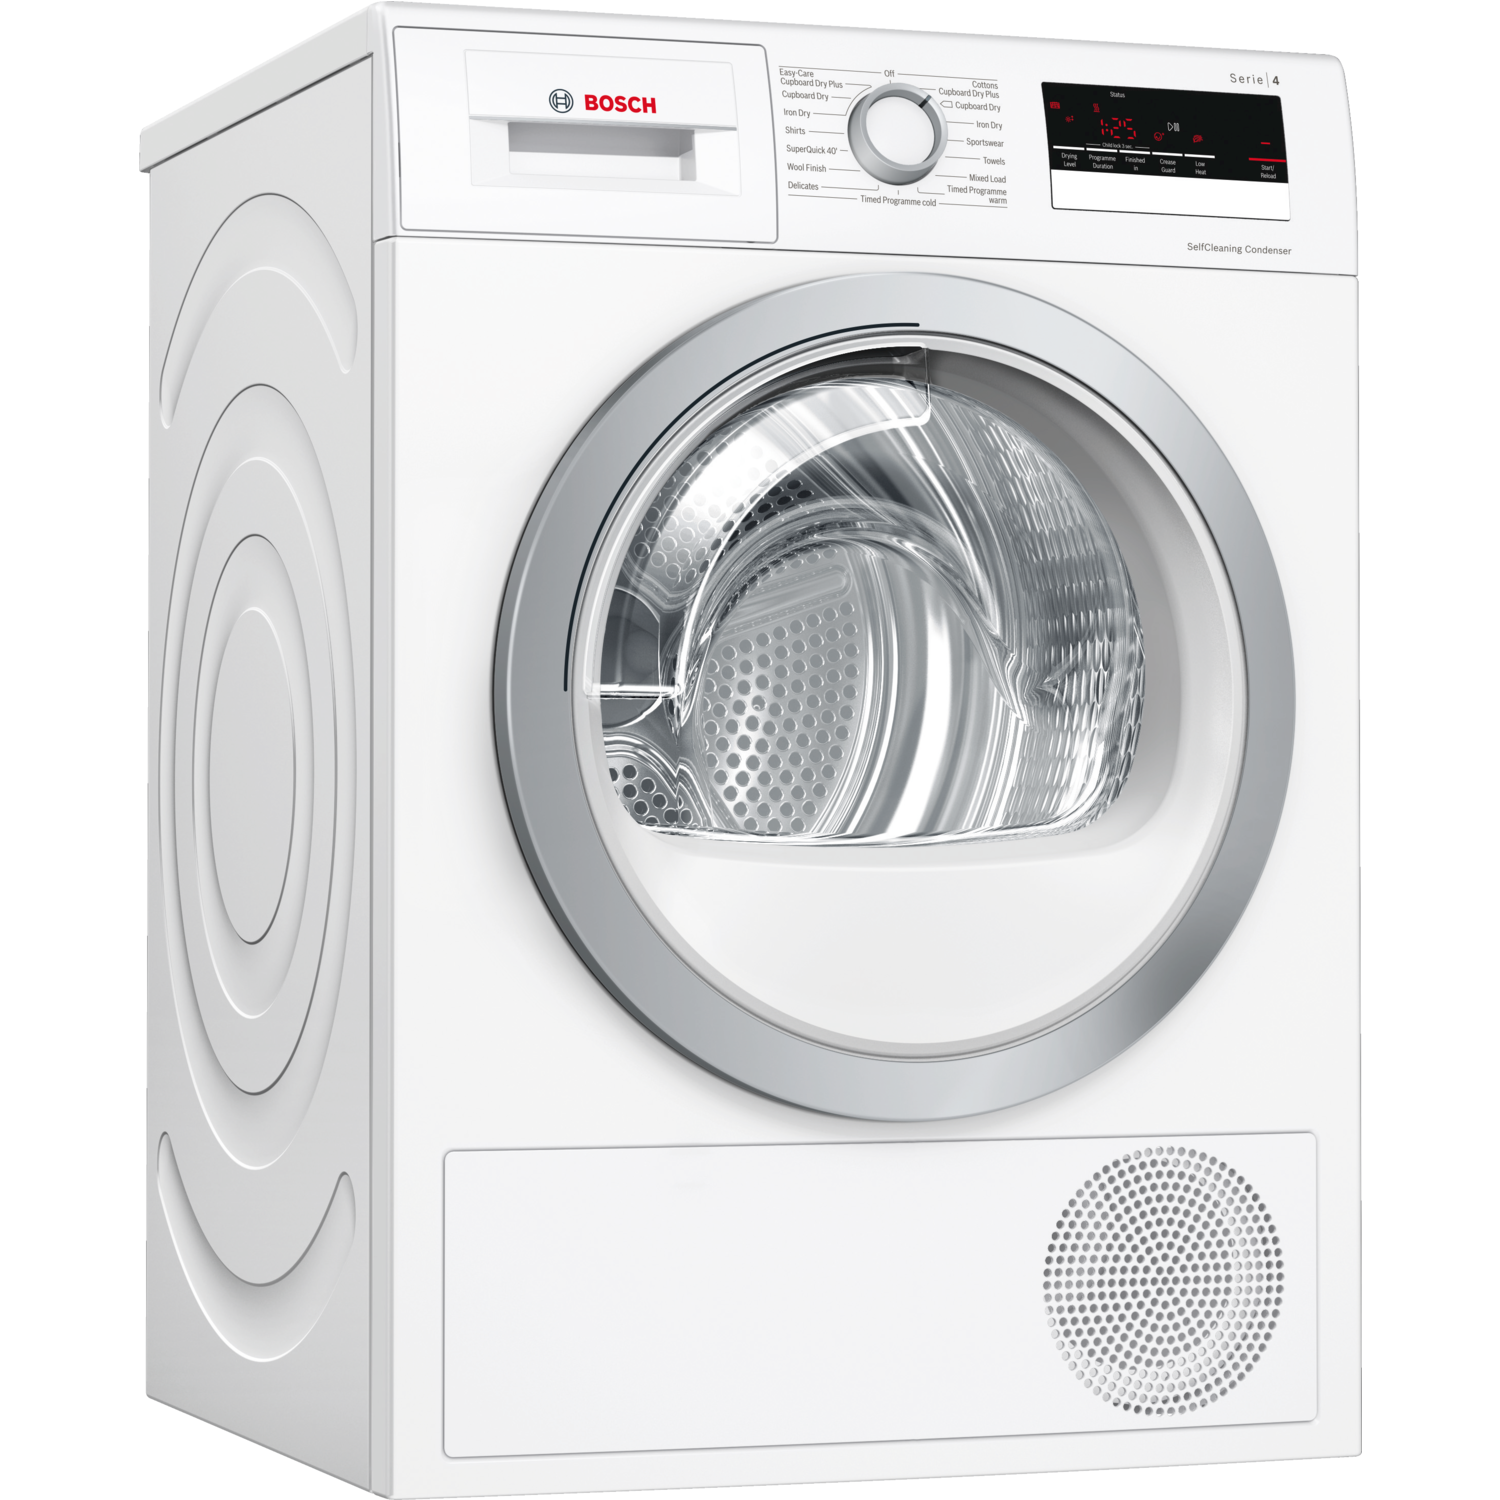 Bosch 8kg Freestanding Heat Pump Tumble Dryer With Self Cleaning Condenser - White